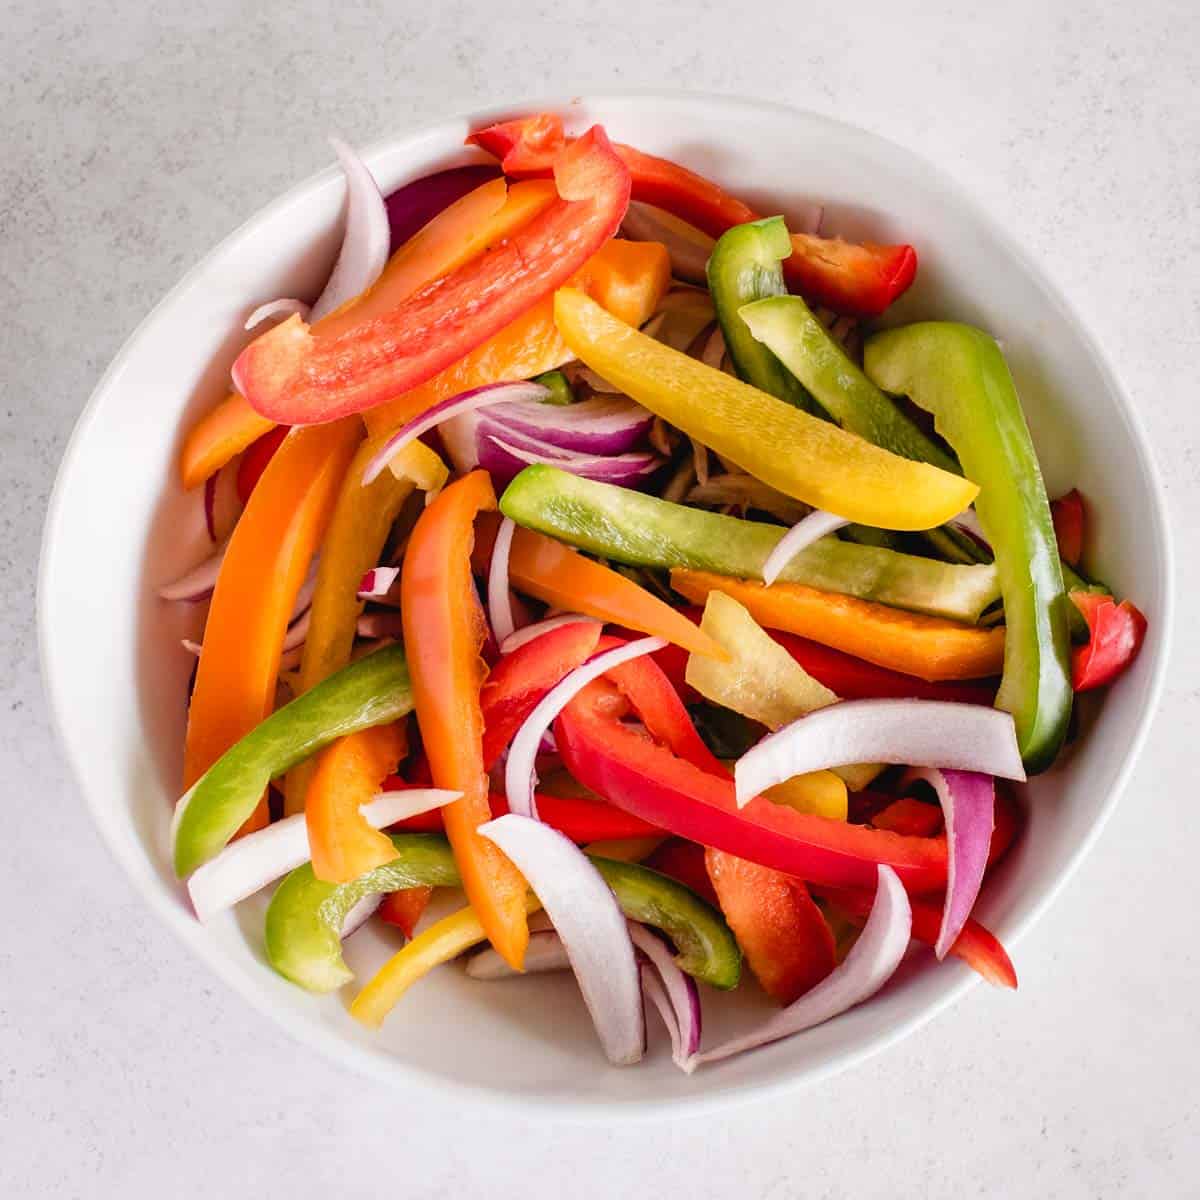 cut up raw sliced different colored peppers and red onion in a bowl